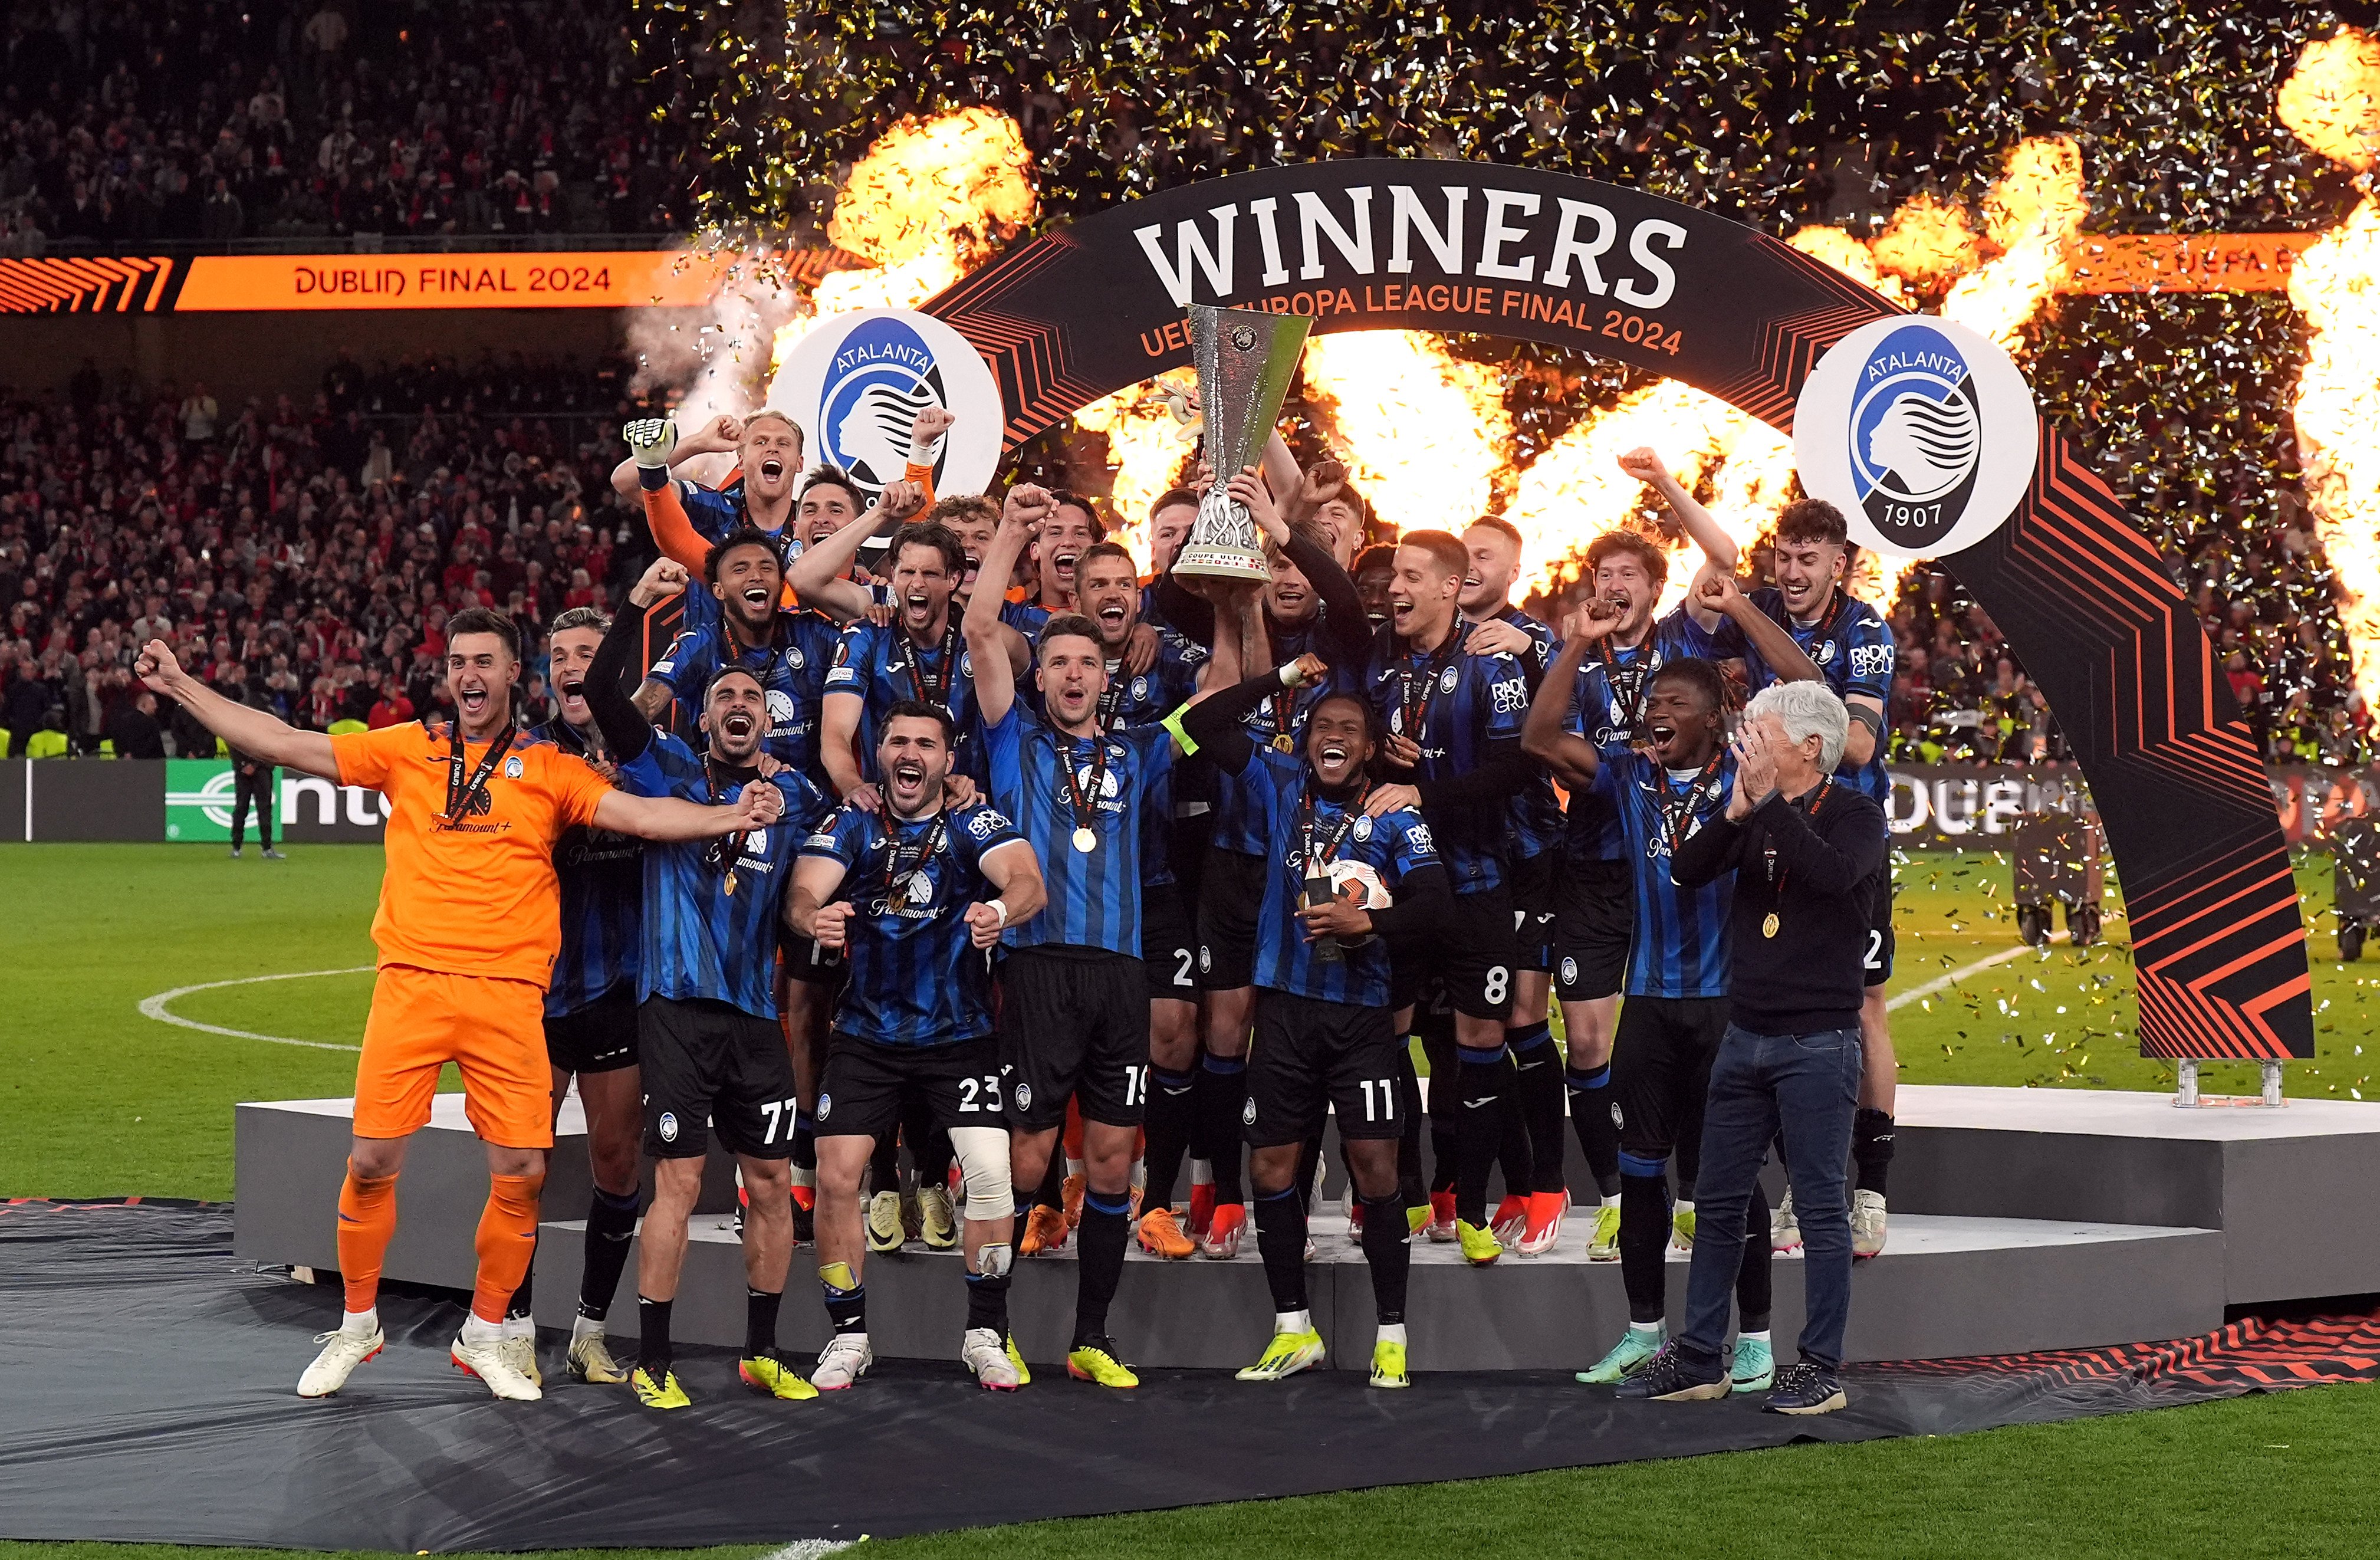 Atalanta players celebrate with the trophy after their victory over Bayer Leverkusen in the Europa League final. Photo: dpa